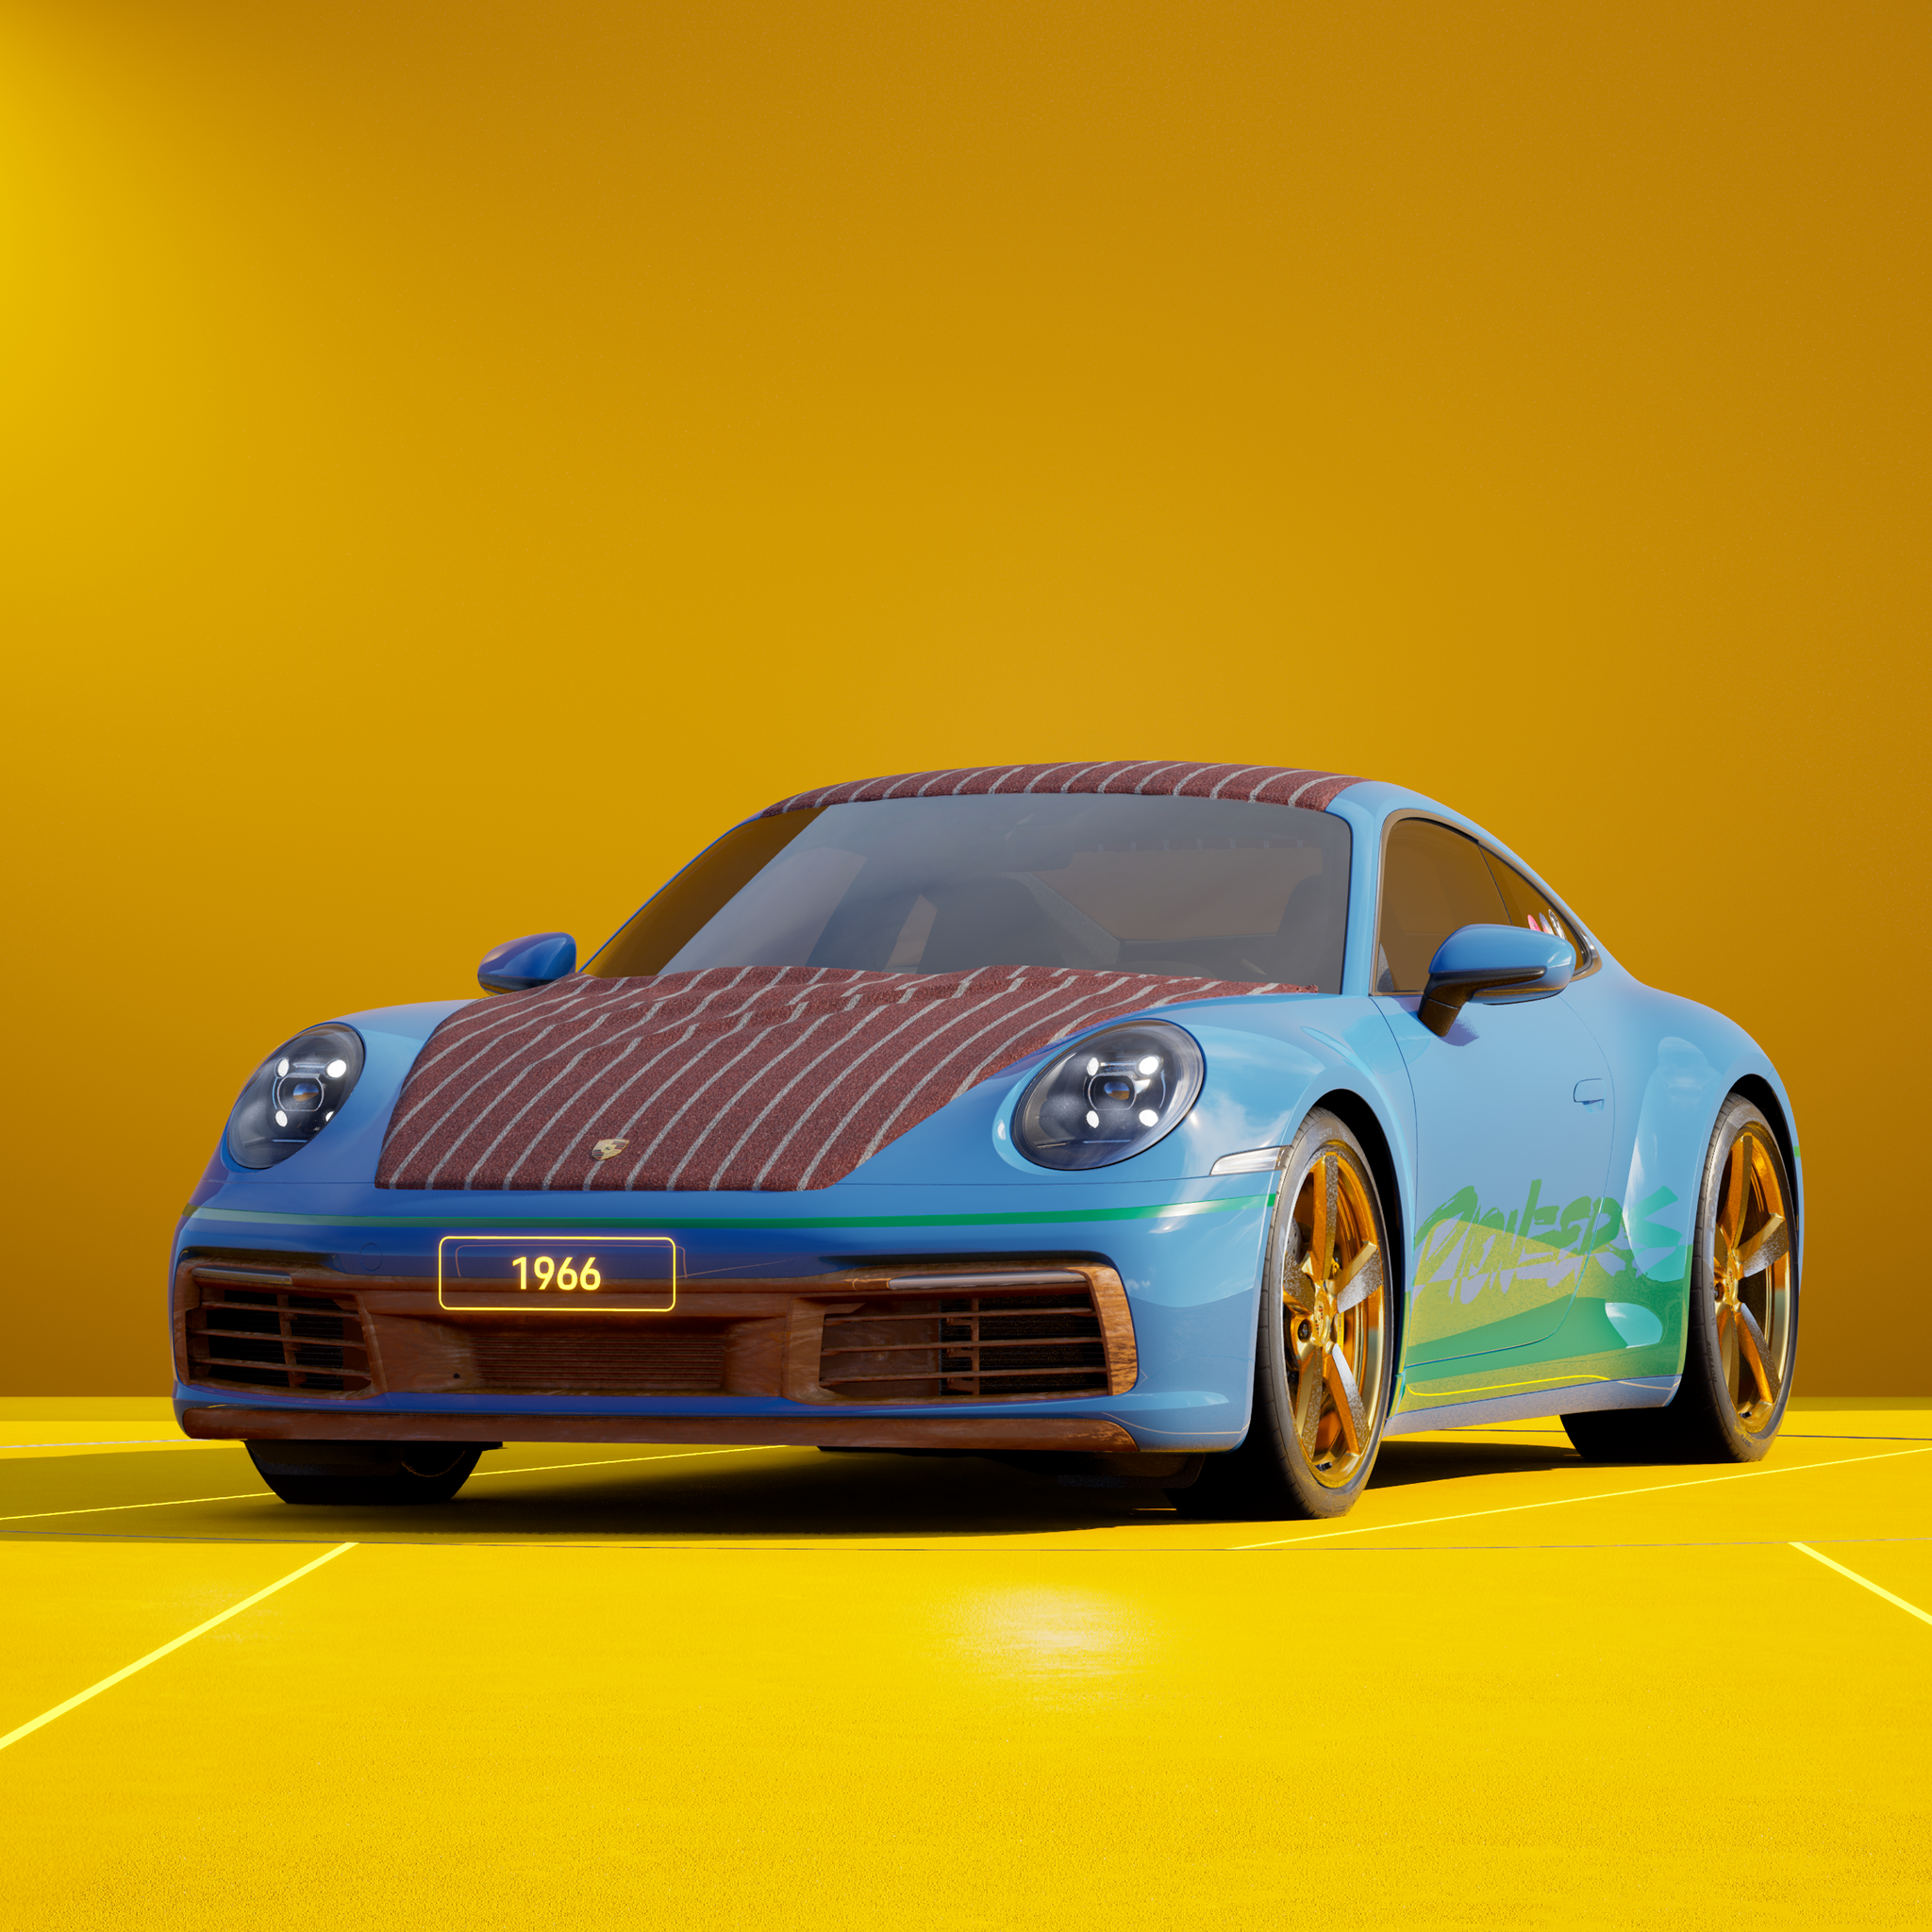 The PORSCHΞ 911 1966 image in phase